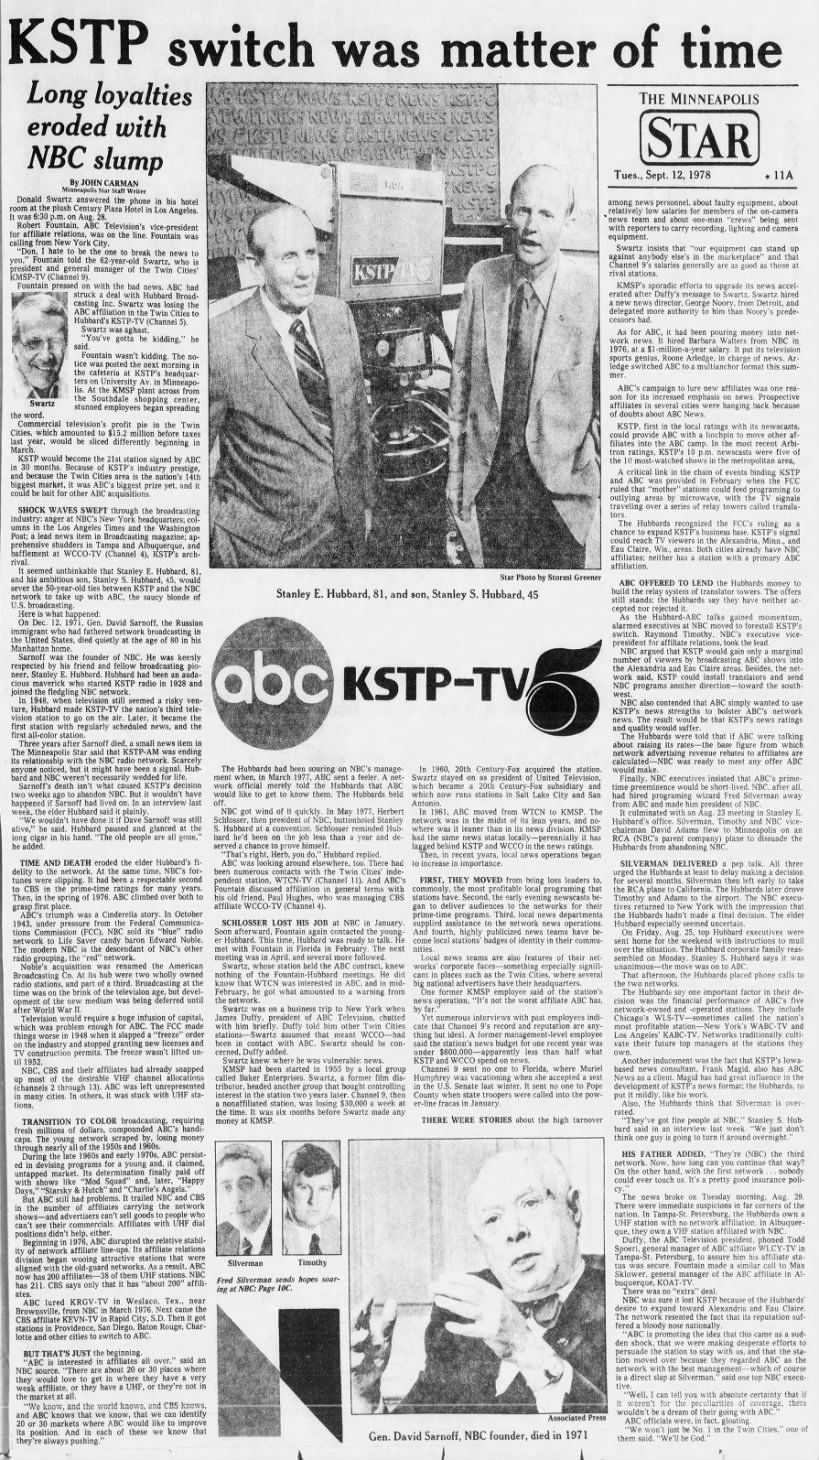 KSTP switch was matter of time: Long loyalties eroded with NBC slump